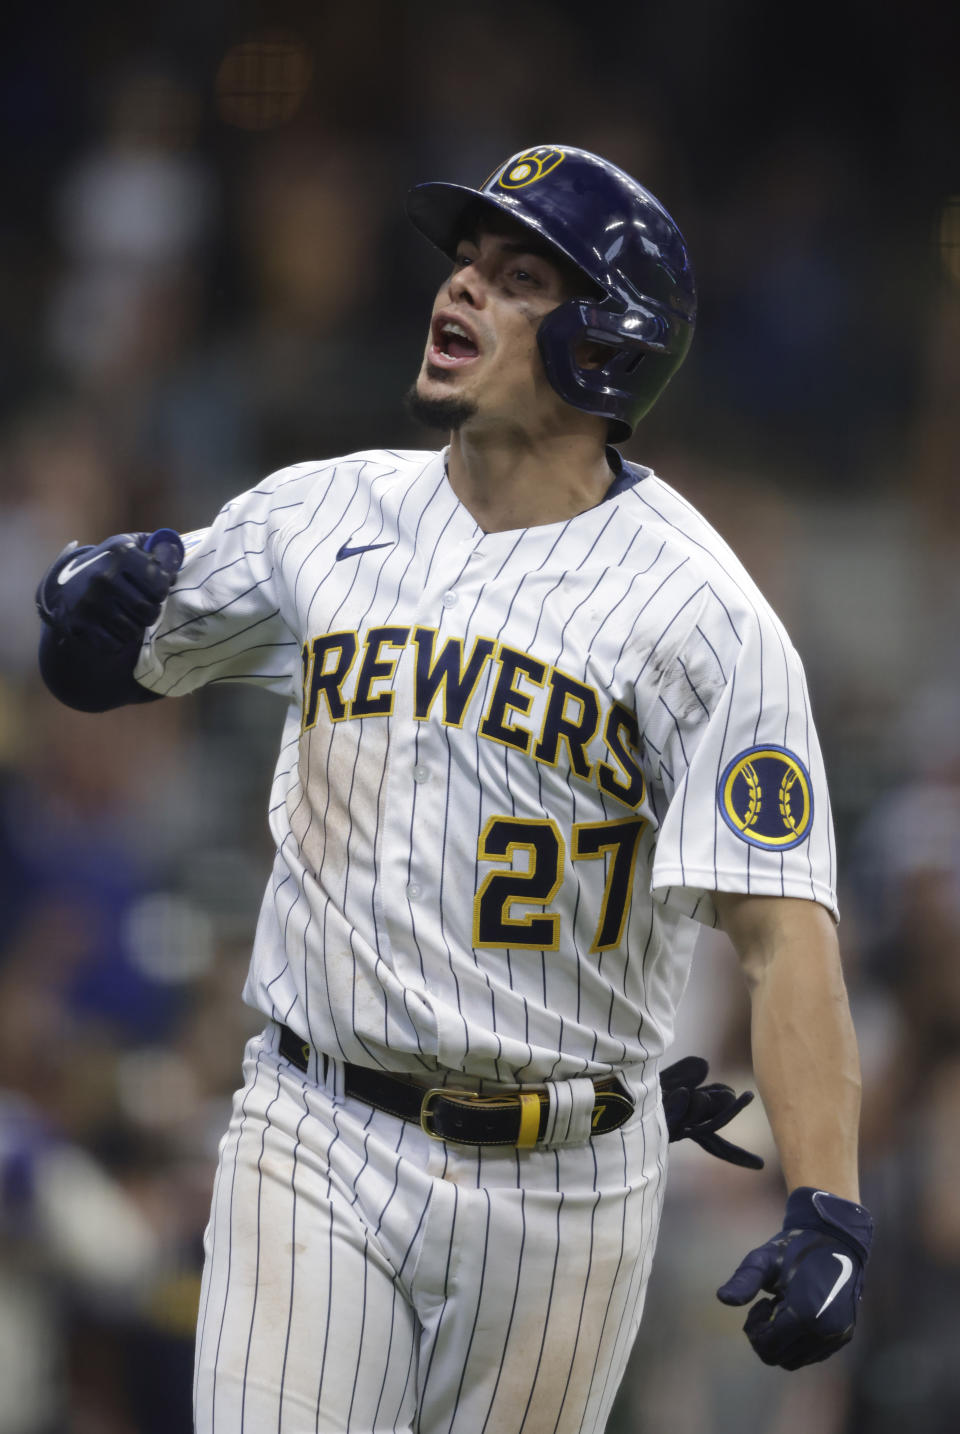 Milwaukee Brewers' Willy Adames reacts after his two-run home run during the seventh inning of a baseball game against the Colorado Rockies, Friday, June 25, 2021, in Milwaukee. (AP Photo/Jeffrey Phelps)